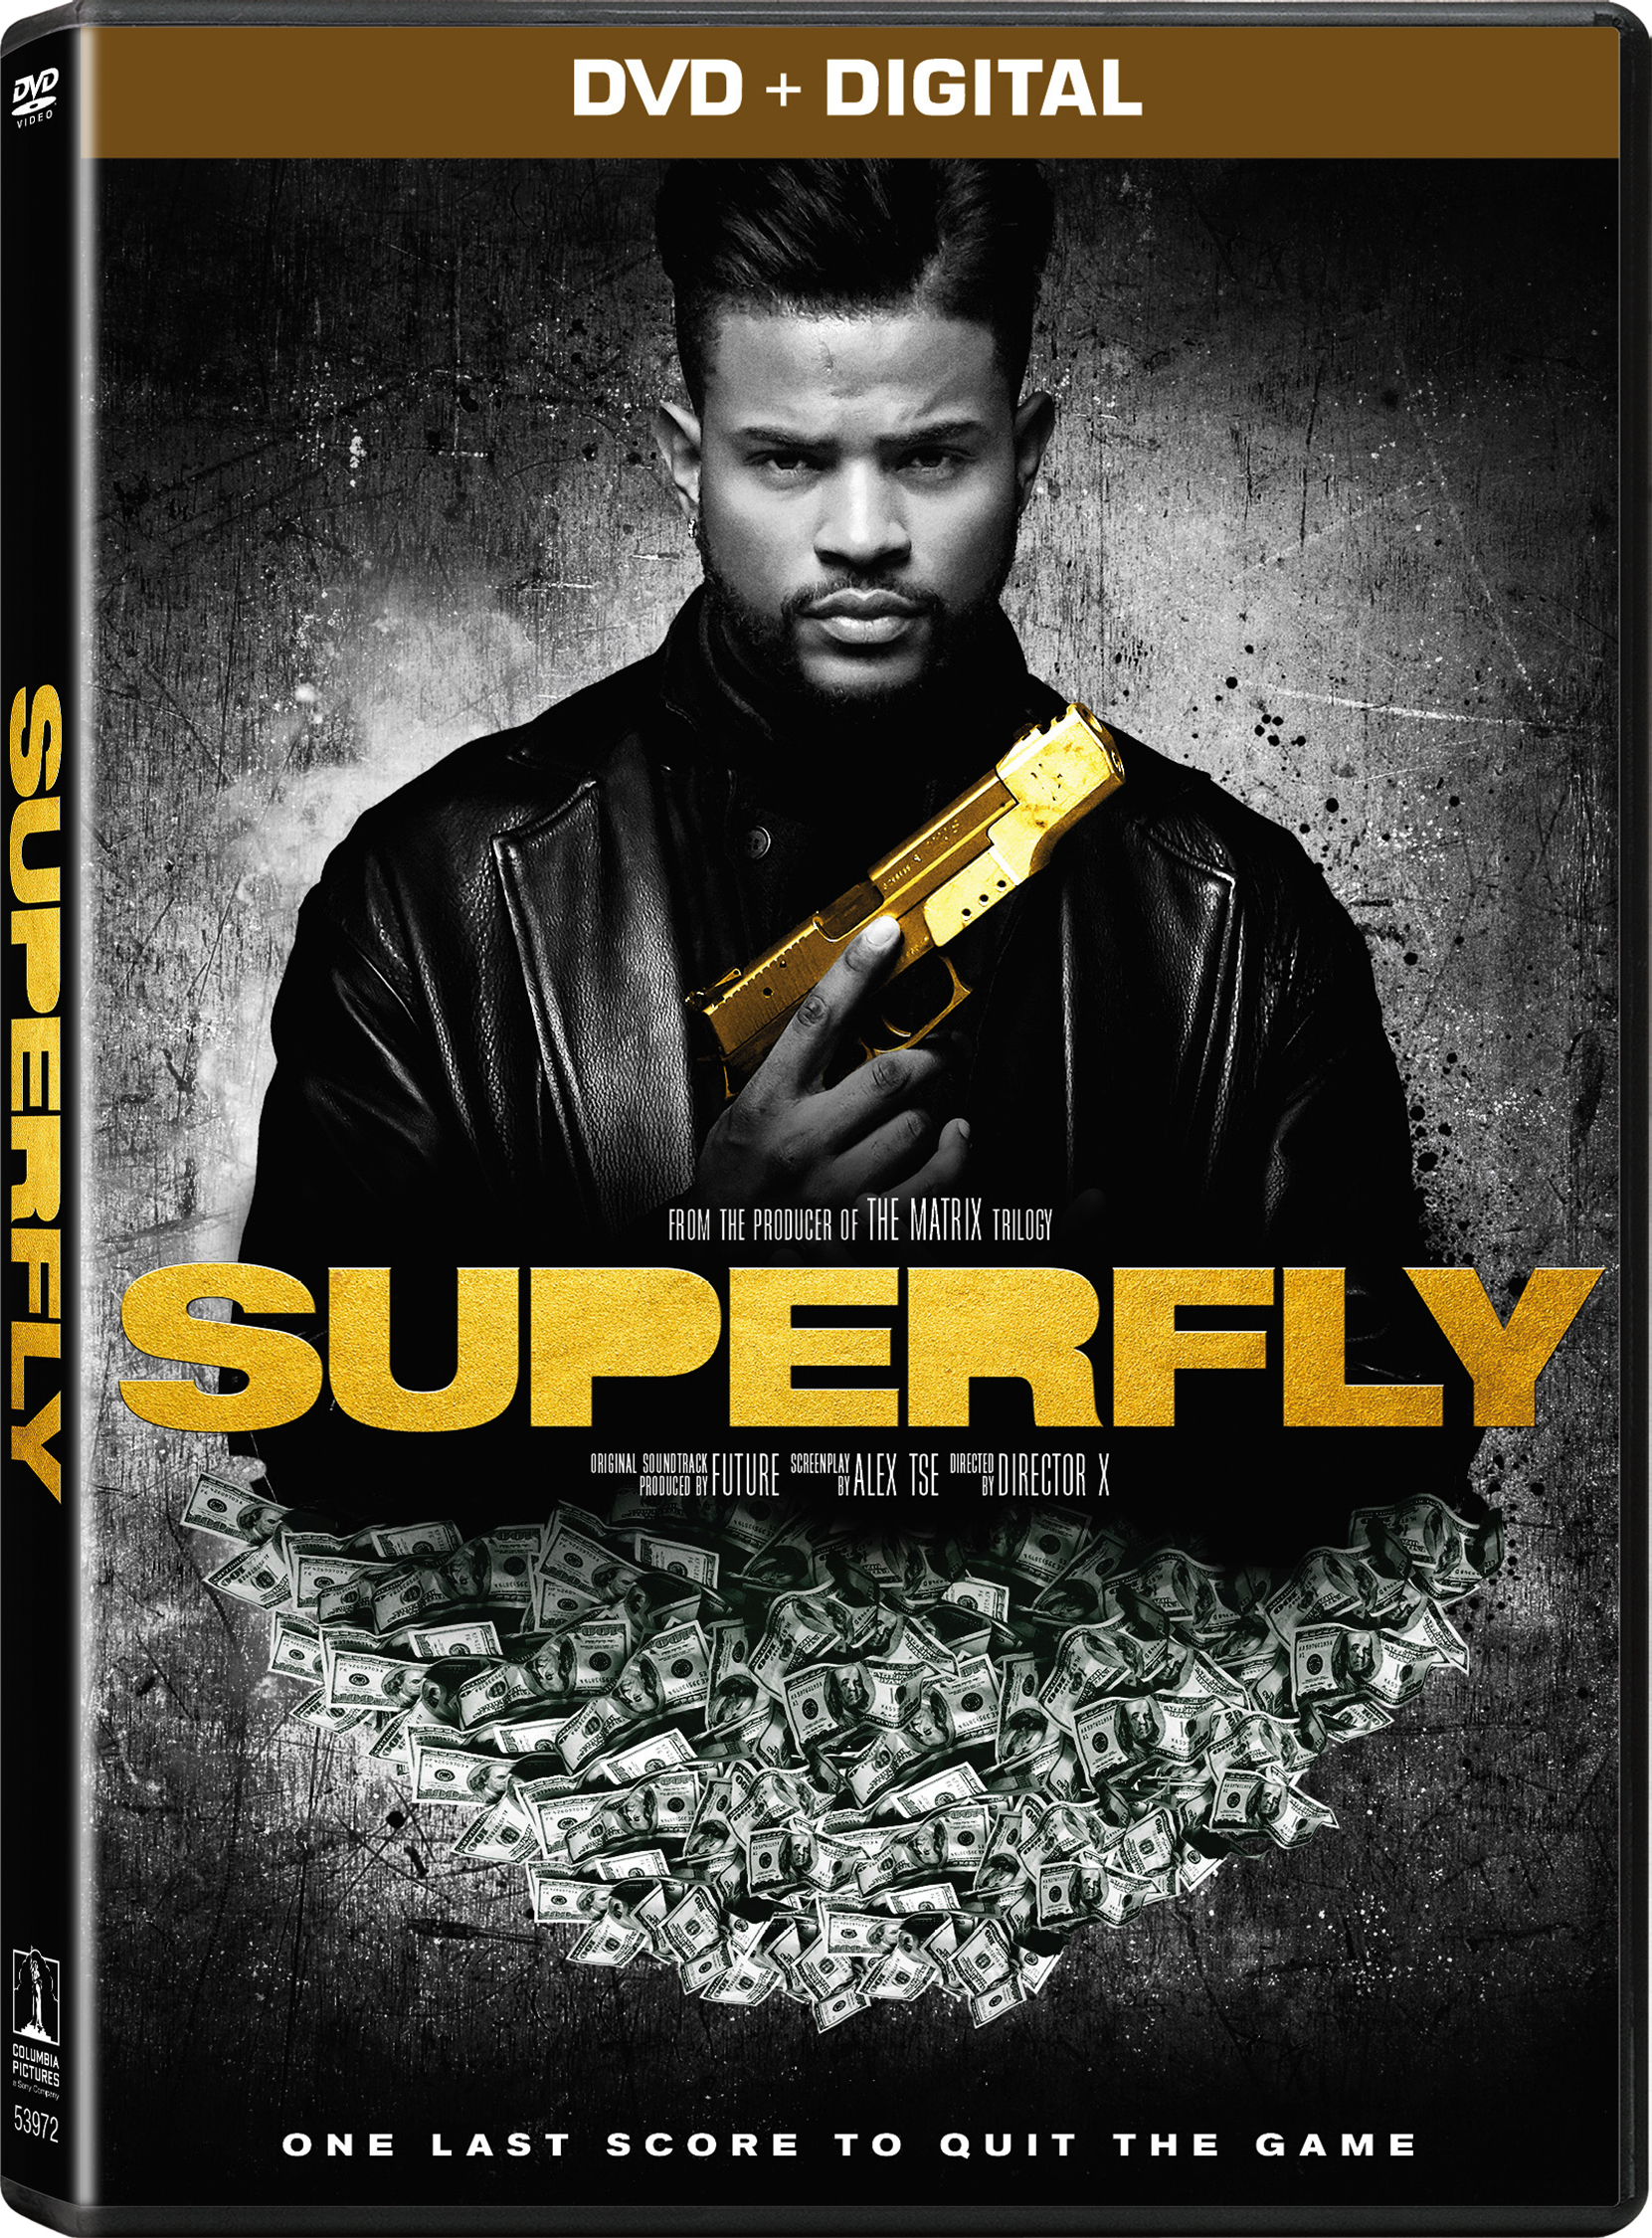 Superfly DVD cover (Sony Pictures Home Entertainment)